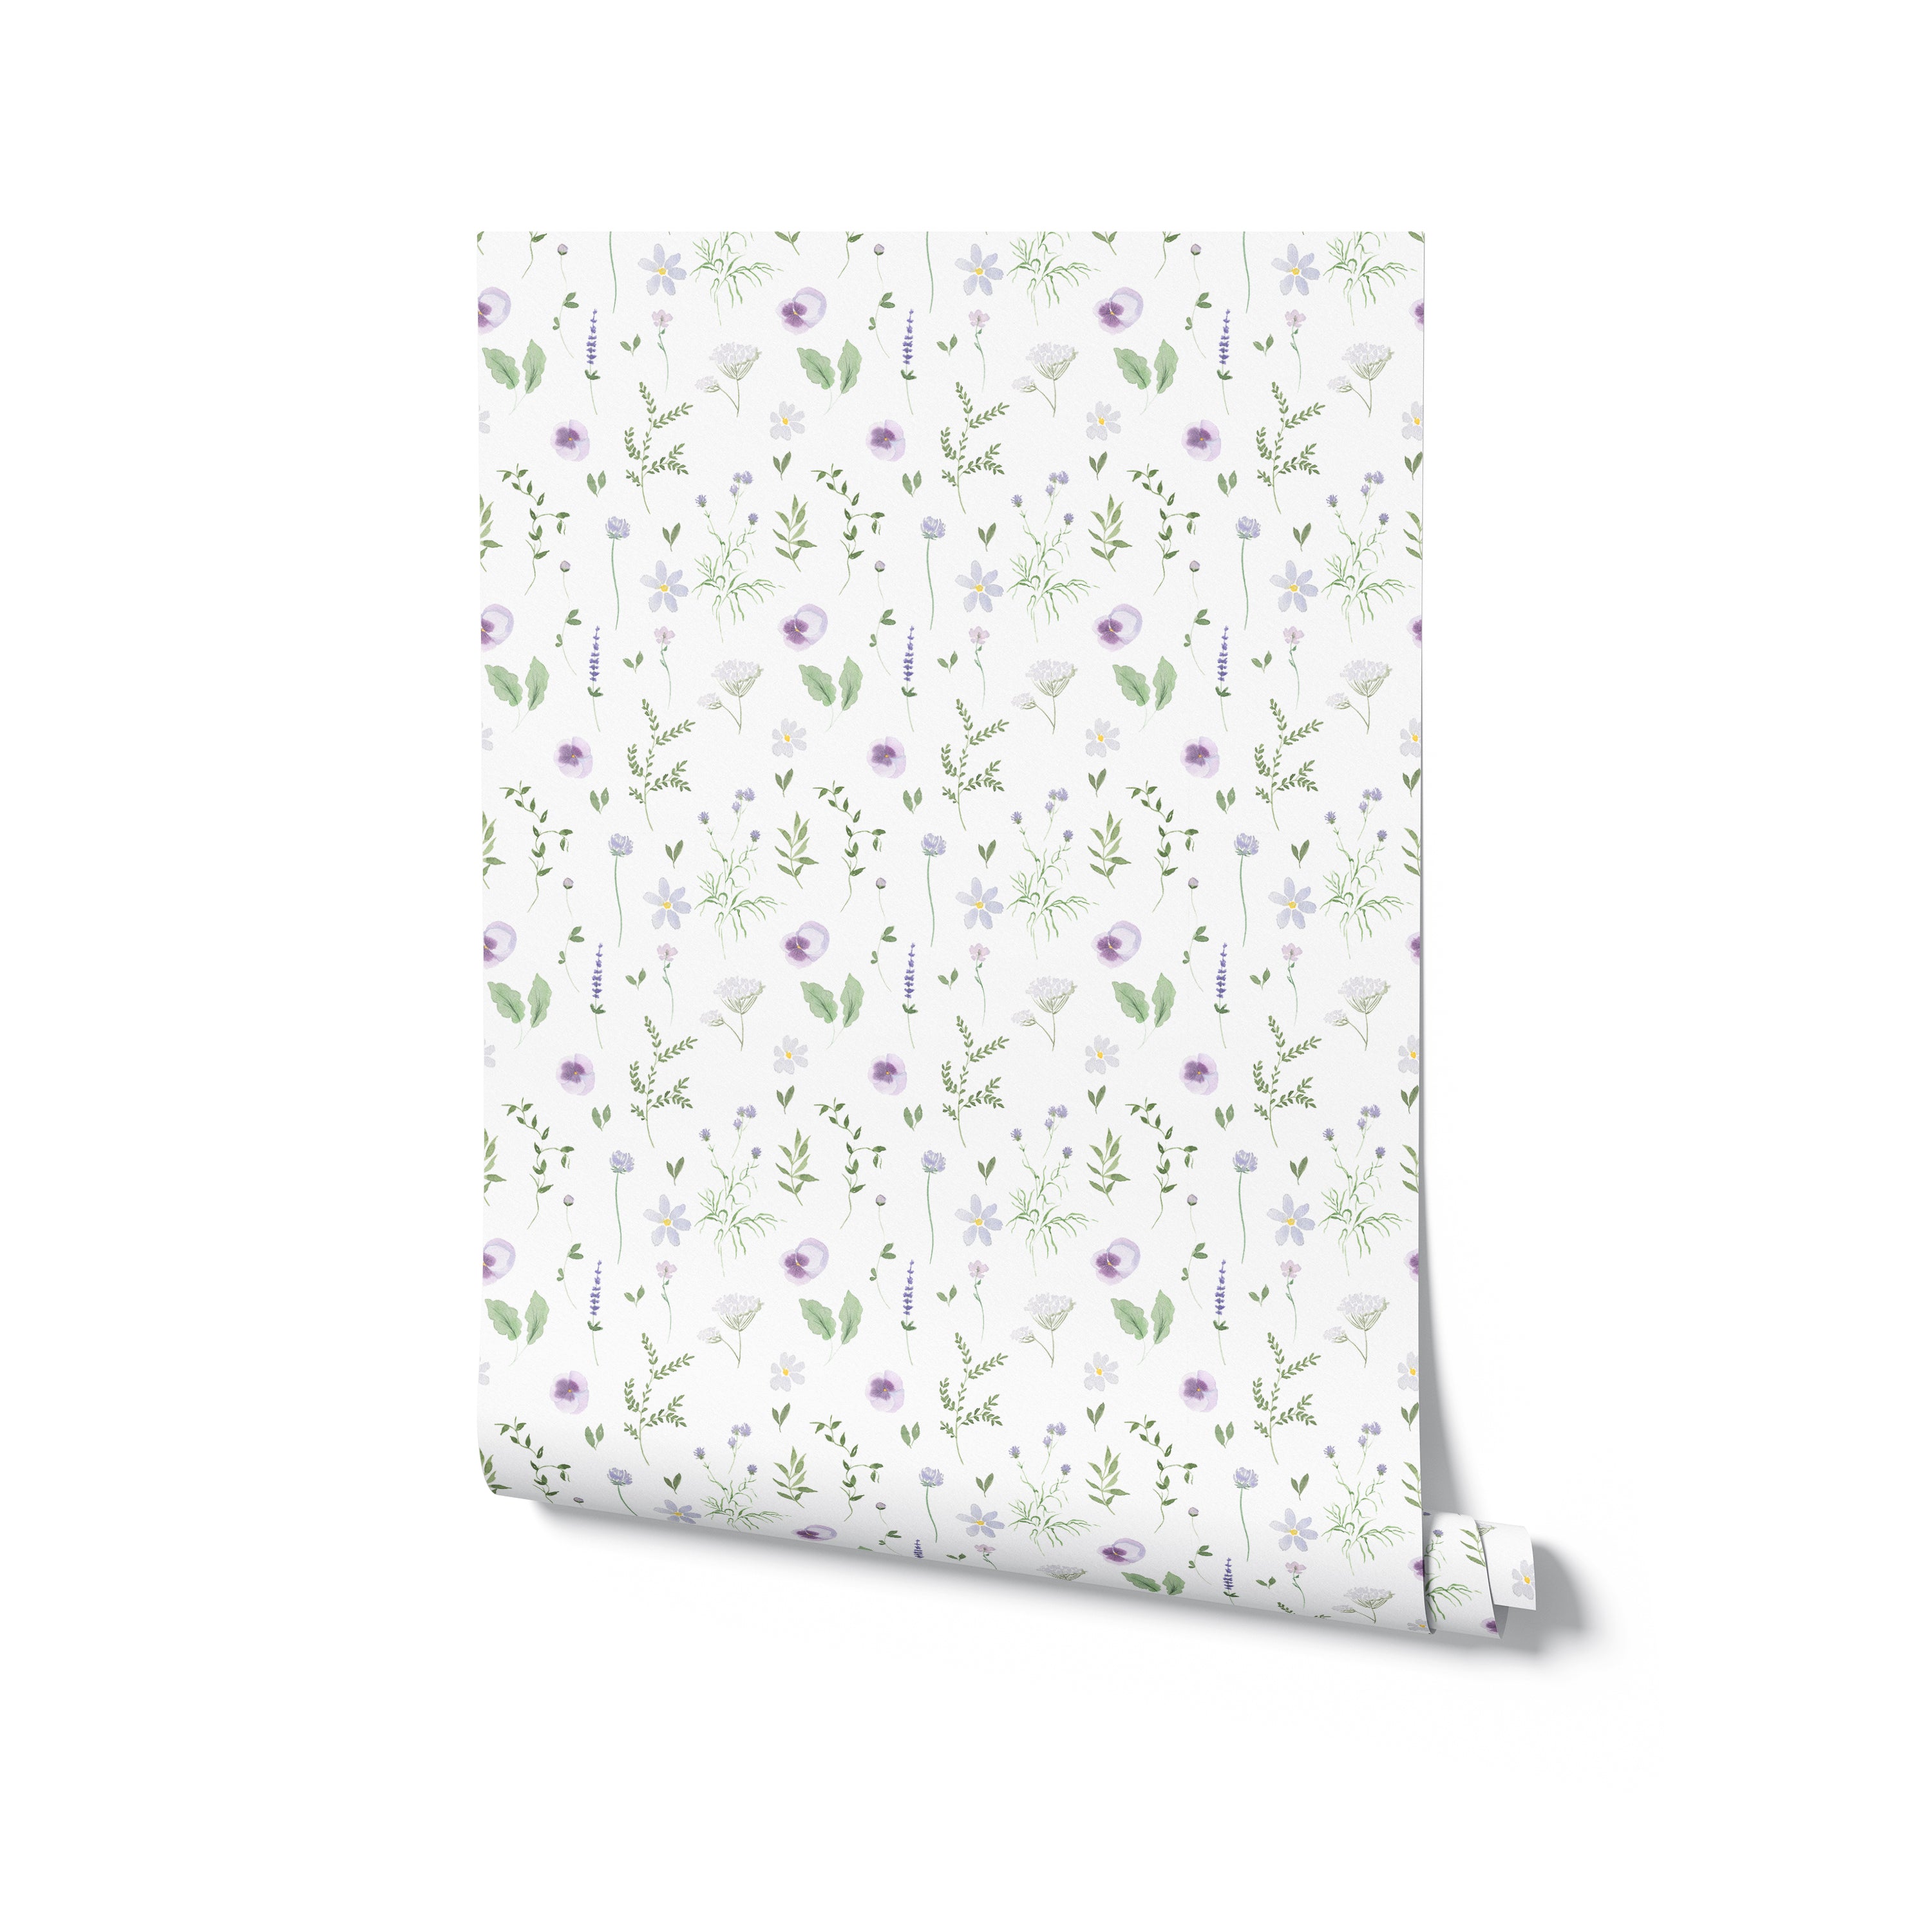 A roll of Wildflower Wonder Wallpaper displaying its continuous pattern of purple and yellow wildflowers and green leaves on a white background, perfect for adding a touch of nature to any room.